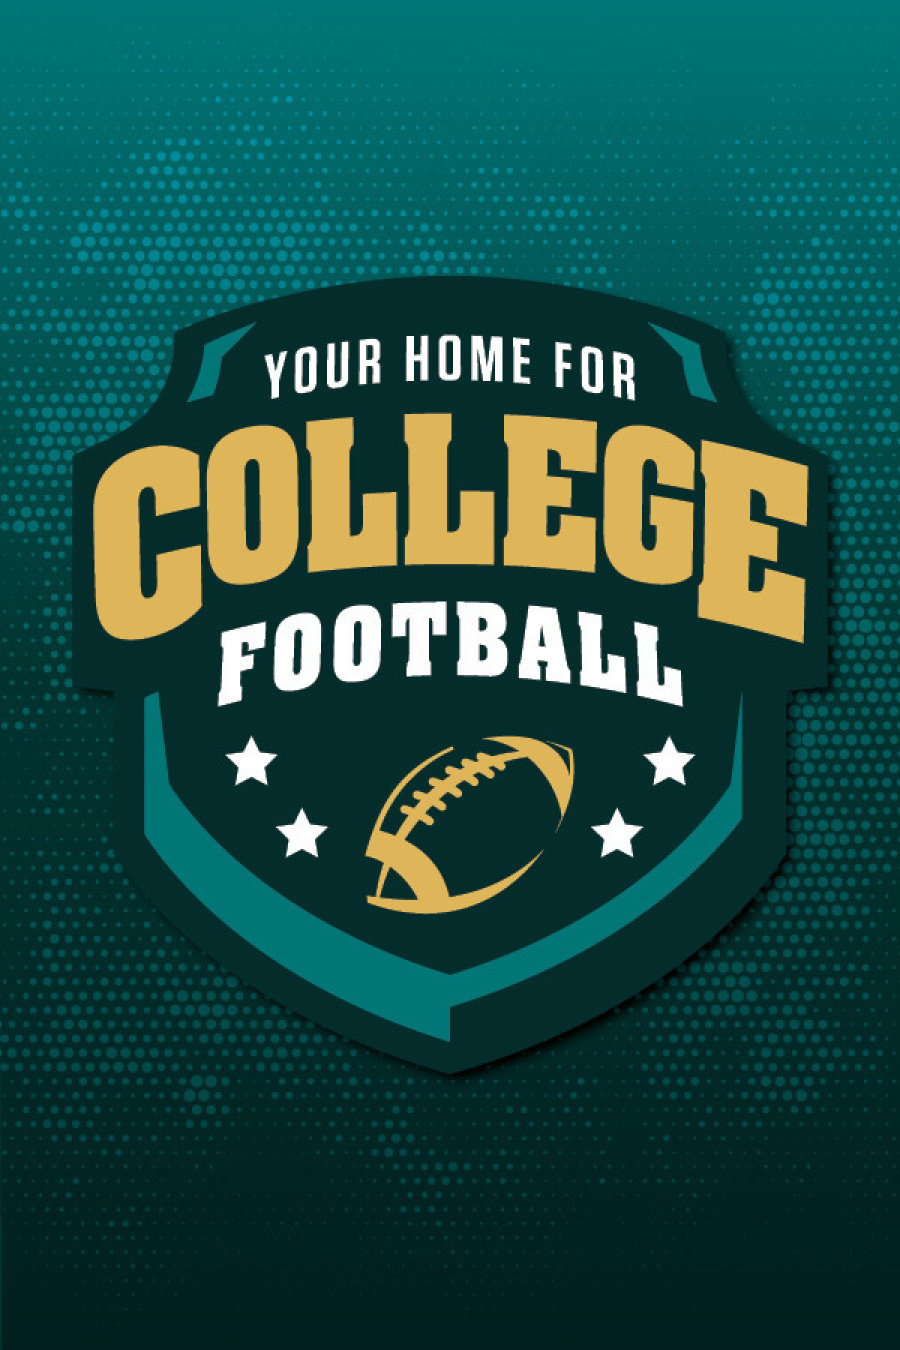 YOUR HOME FOR COLLEGE FOOTBALL